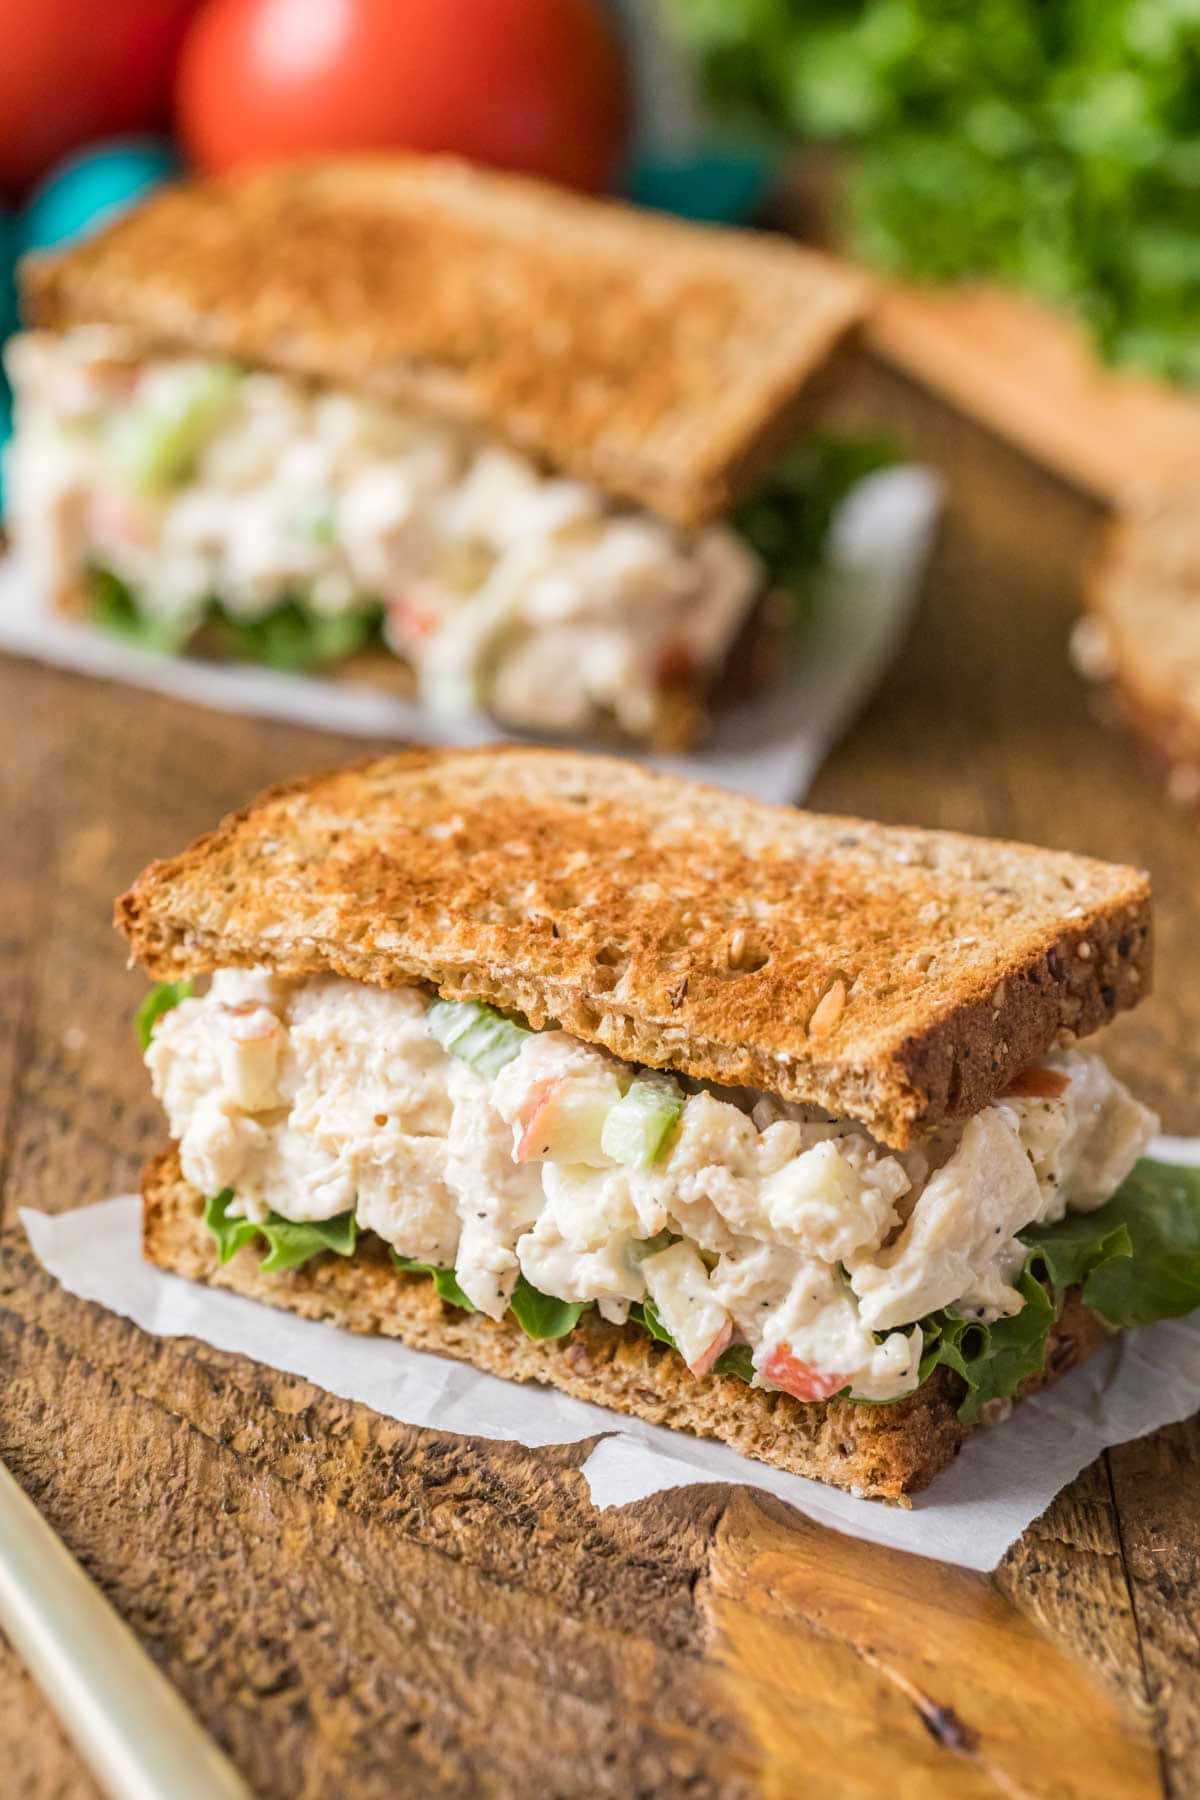 Chicken salad sandwich with lettuce and toasted wheat bread.